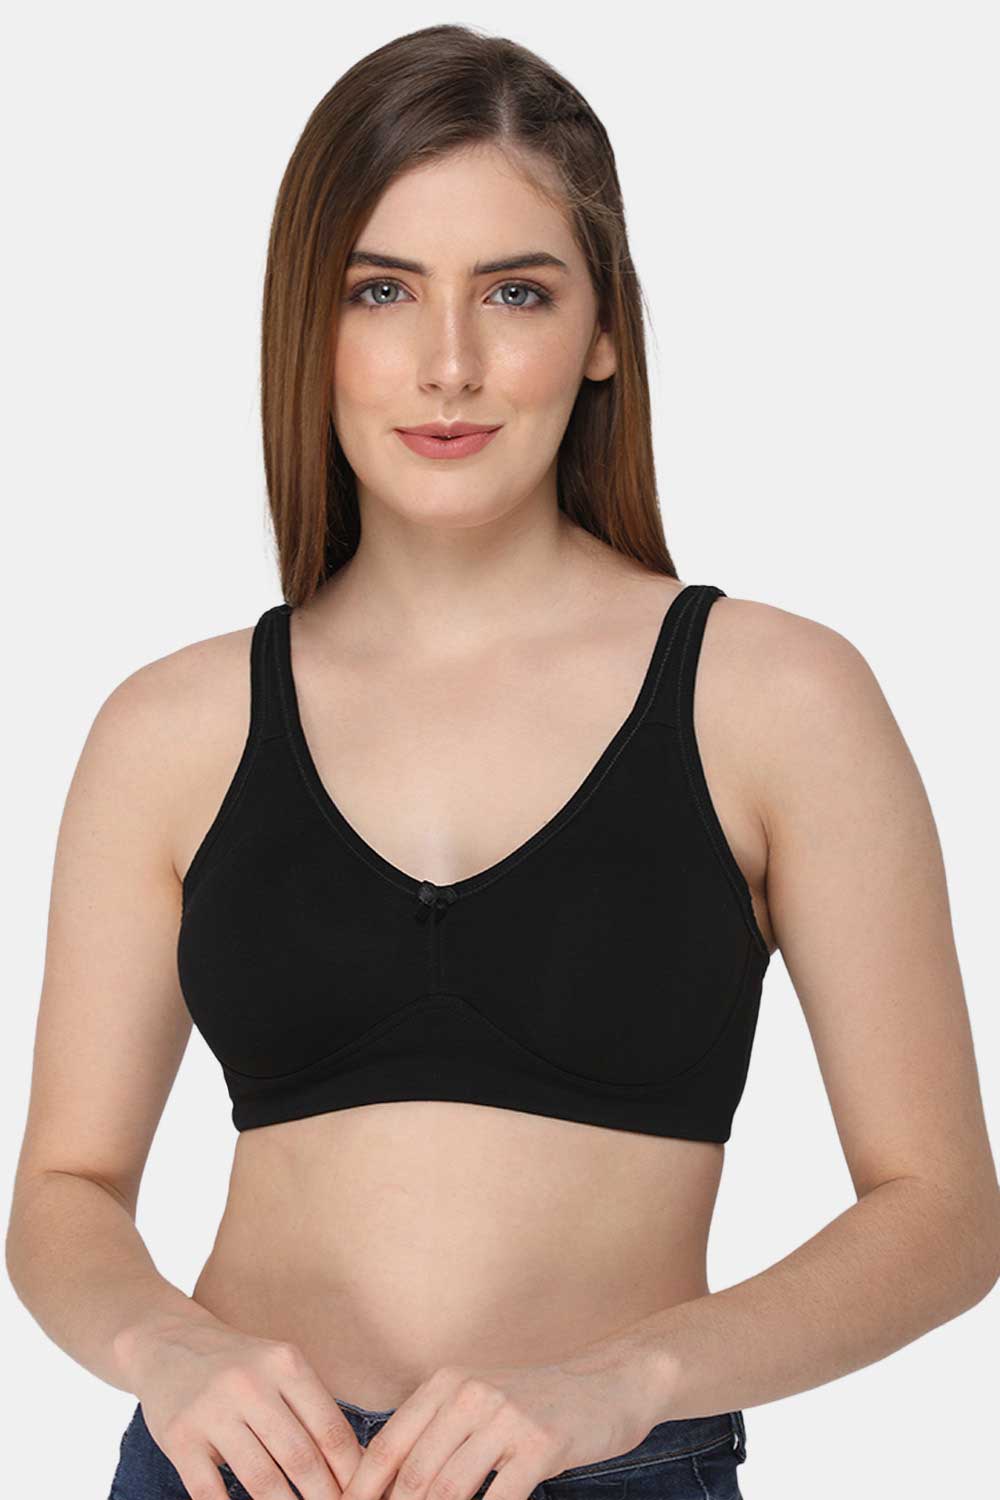 Cotton Casuals Padded Non-Wired T-Shirt Bra - Black